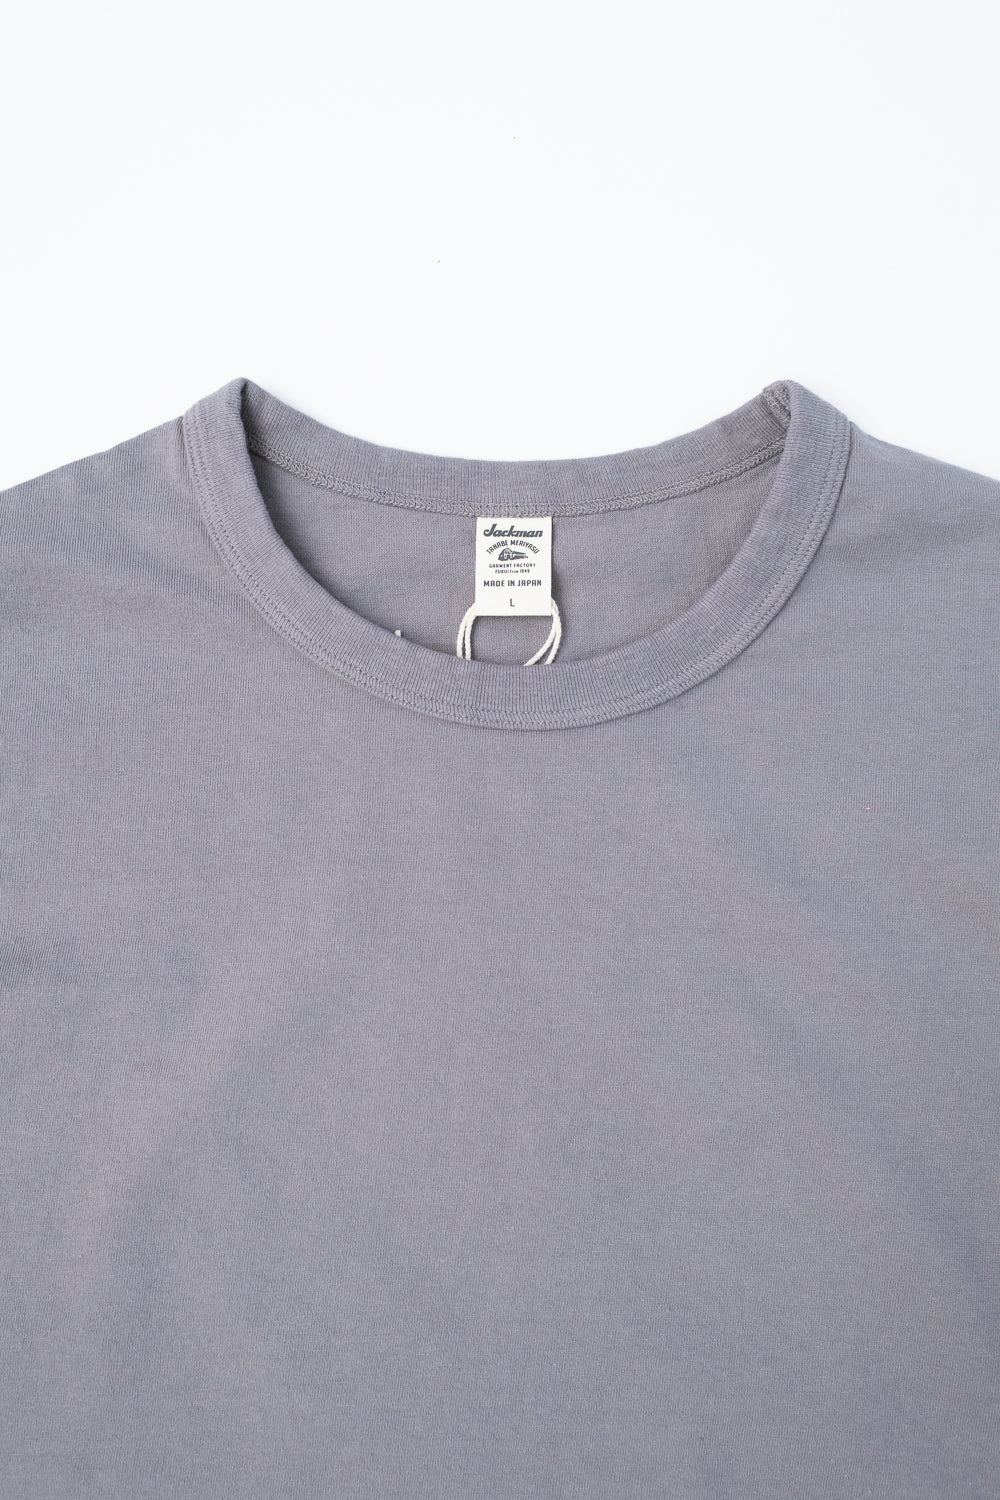 LS Lead Off T-Shirt - 215 Pewter Gray